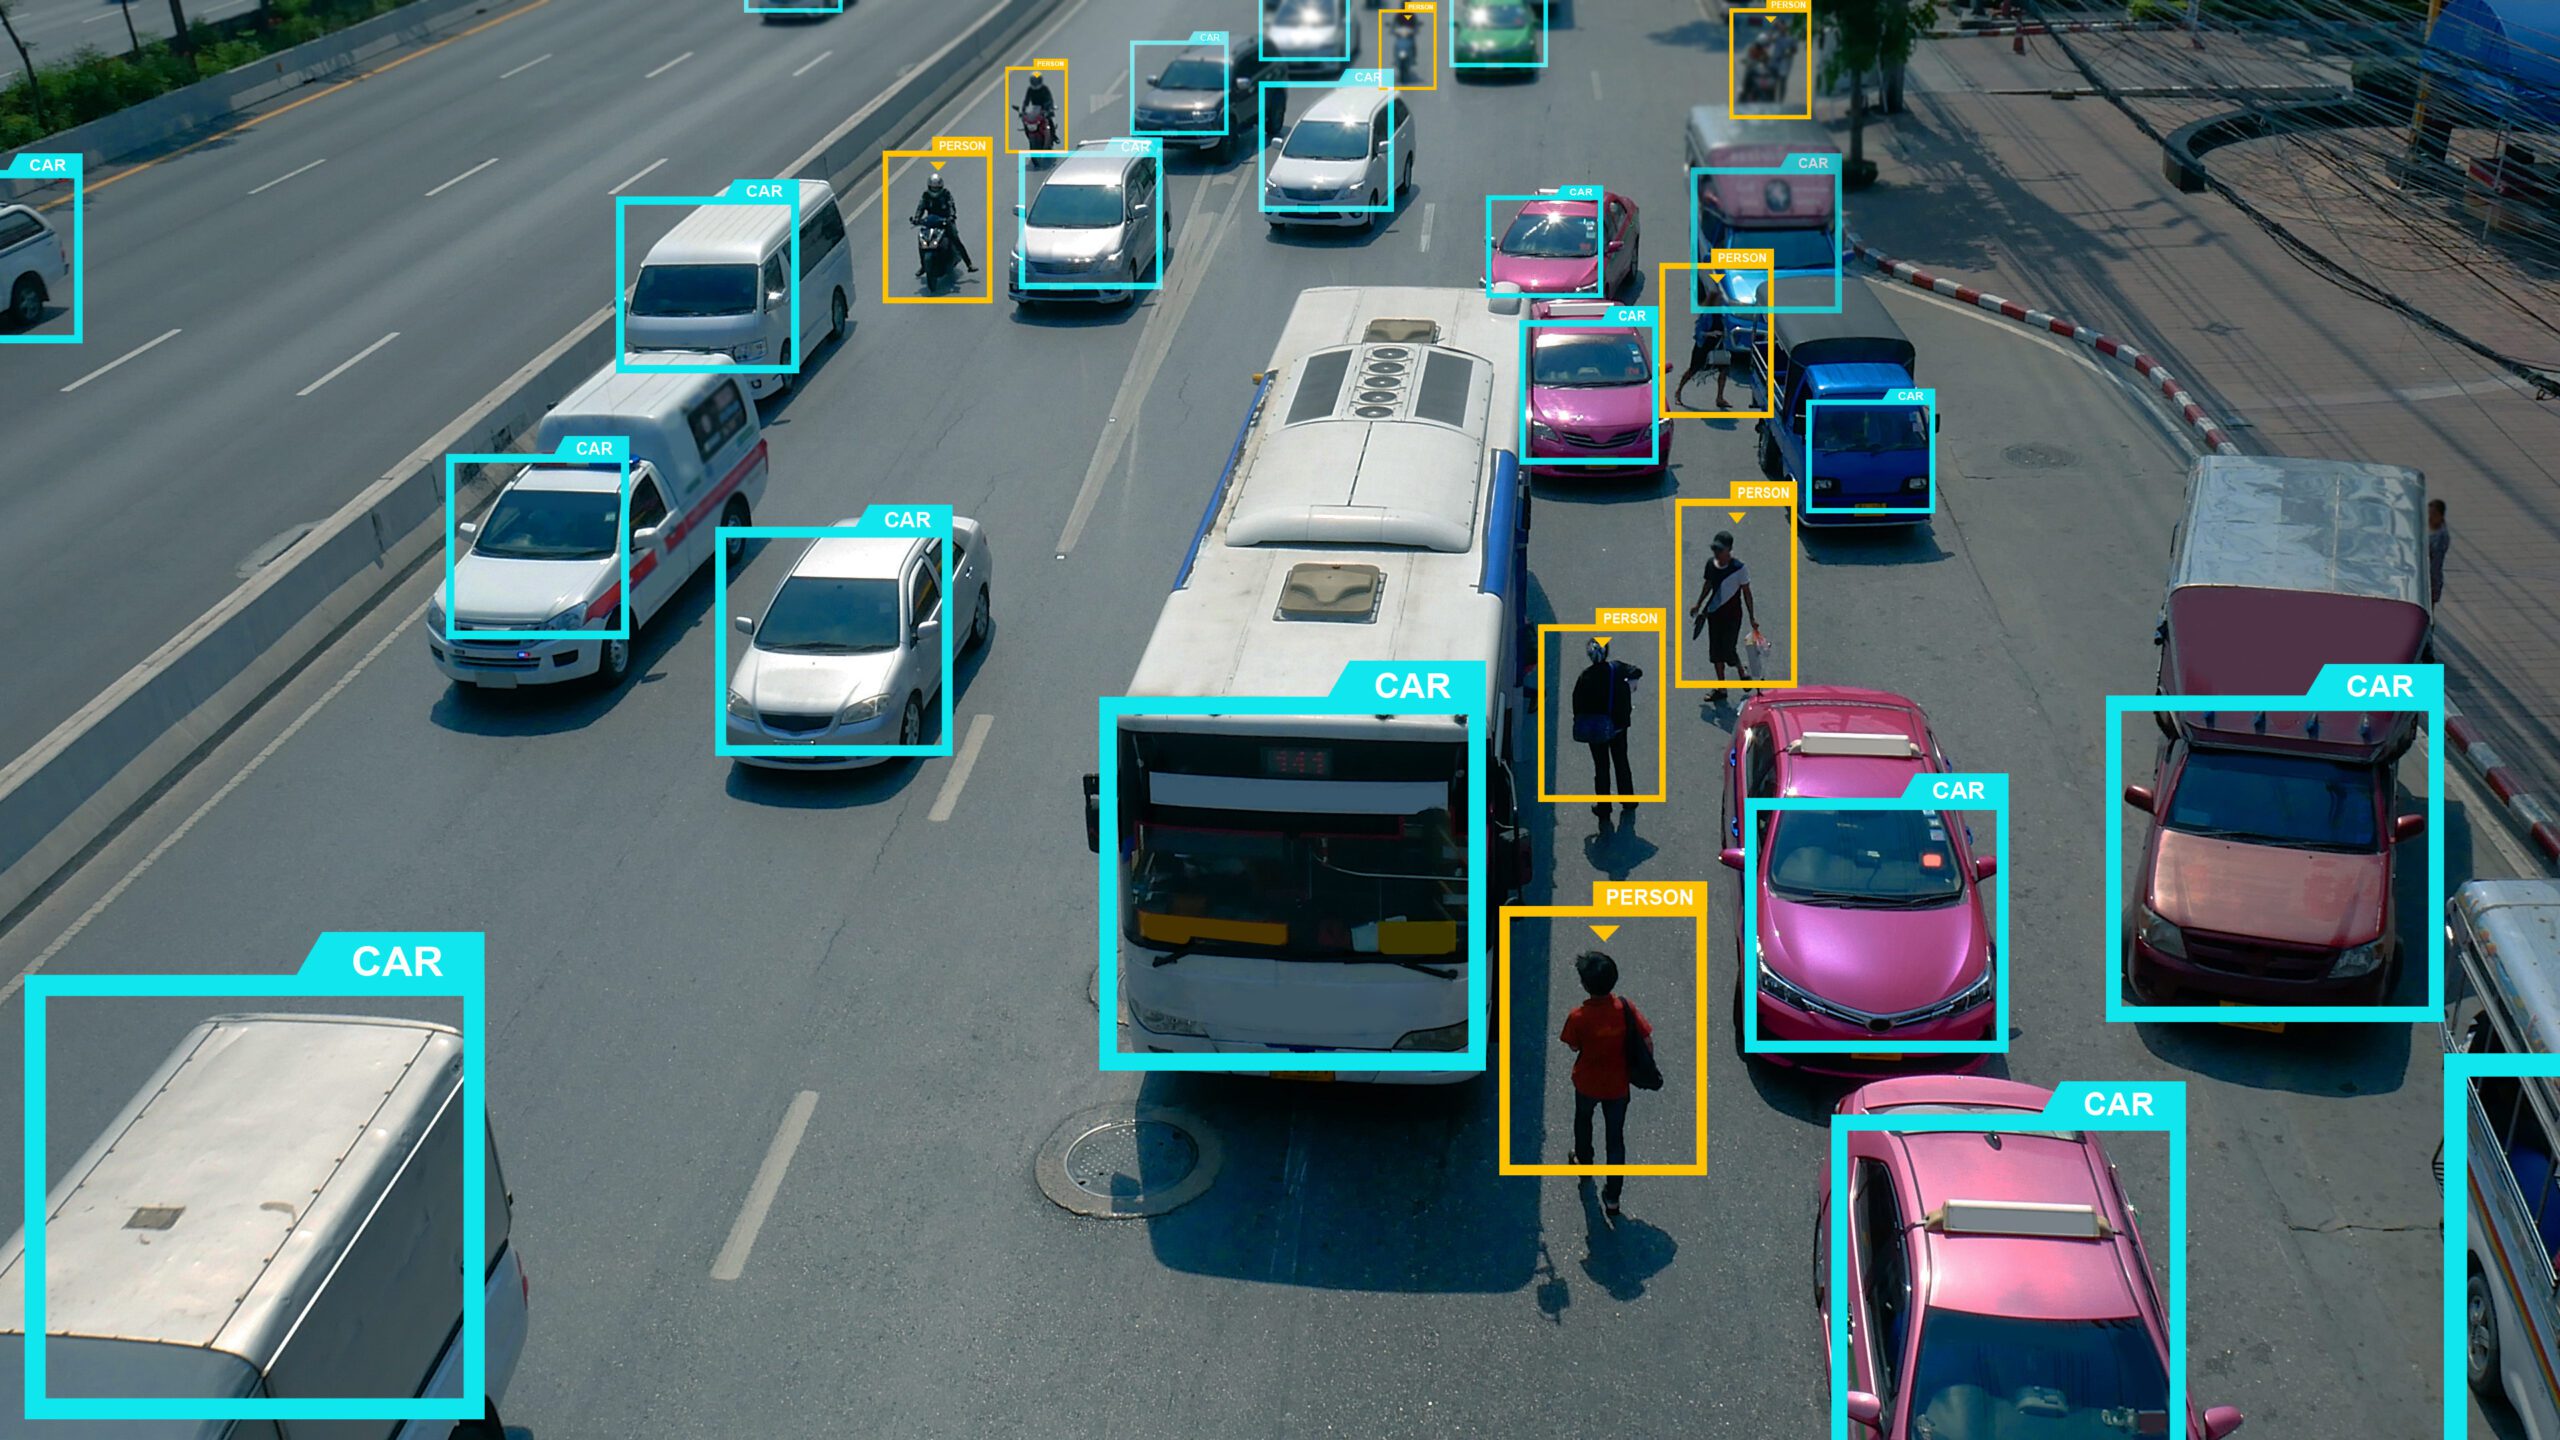 Cars and people being detected by AI